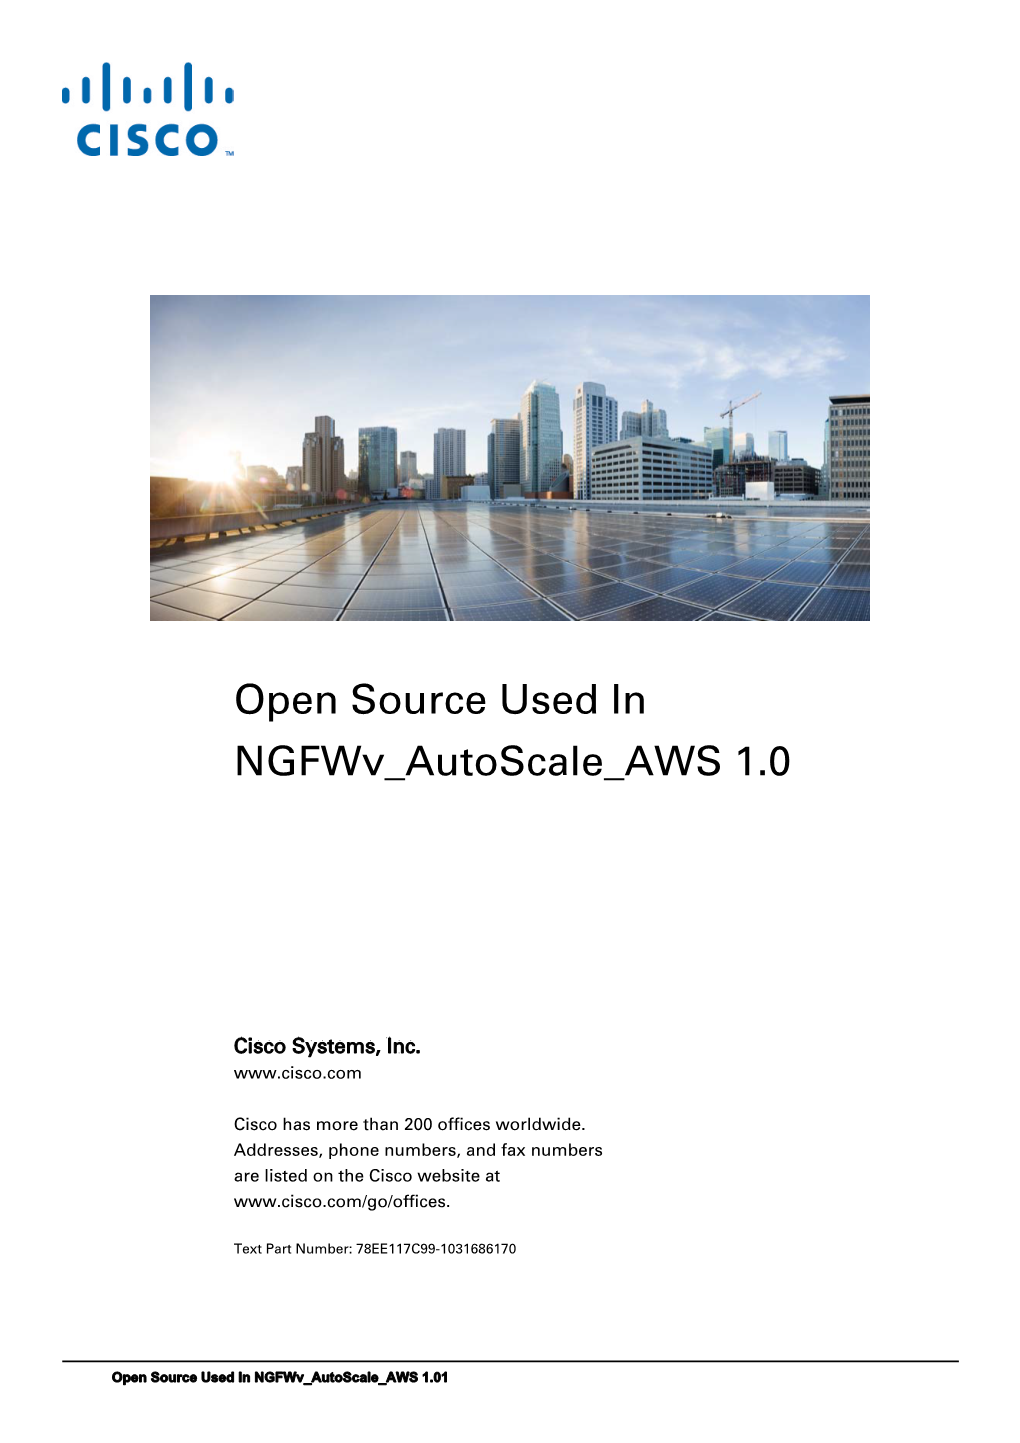 Open Source Used in Ngfwv Autoscale AWS 1.0